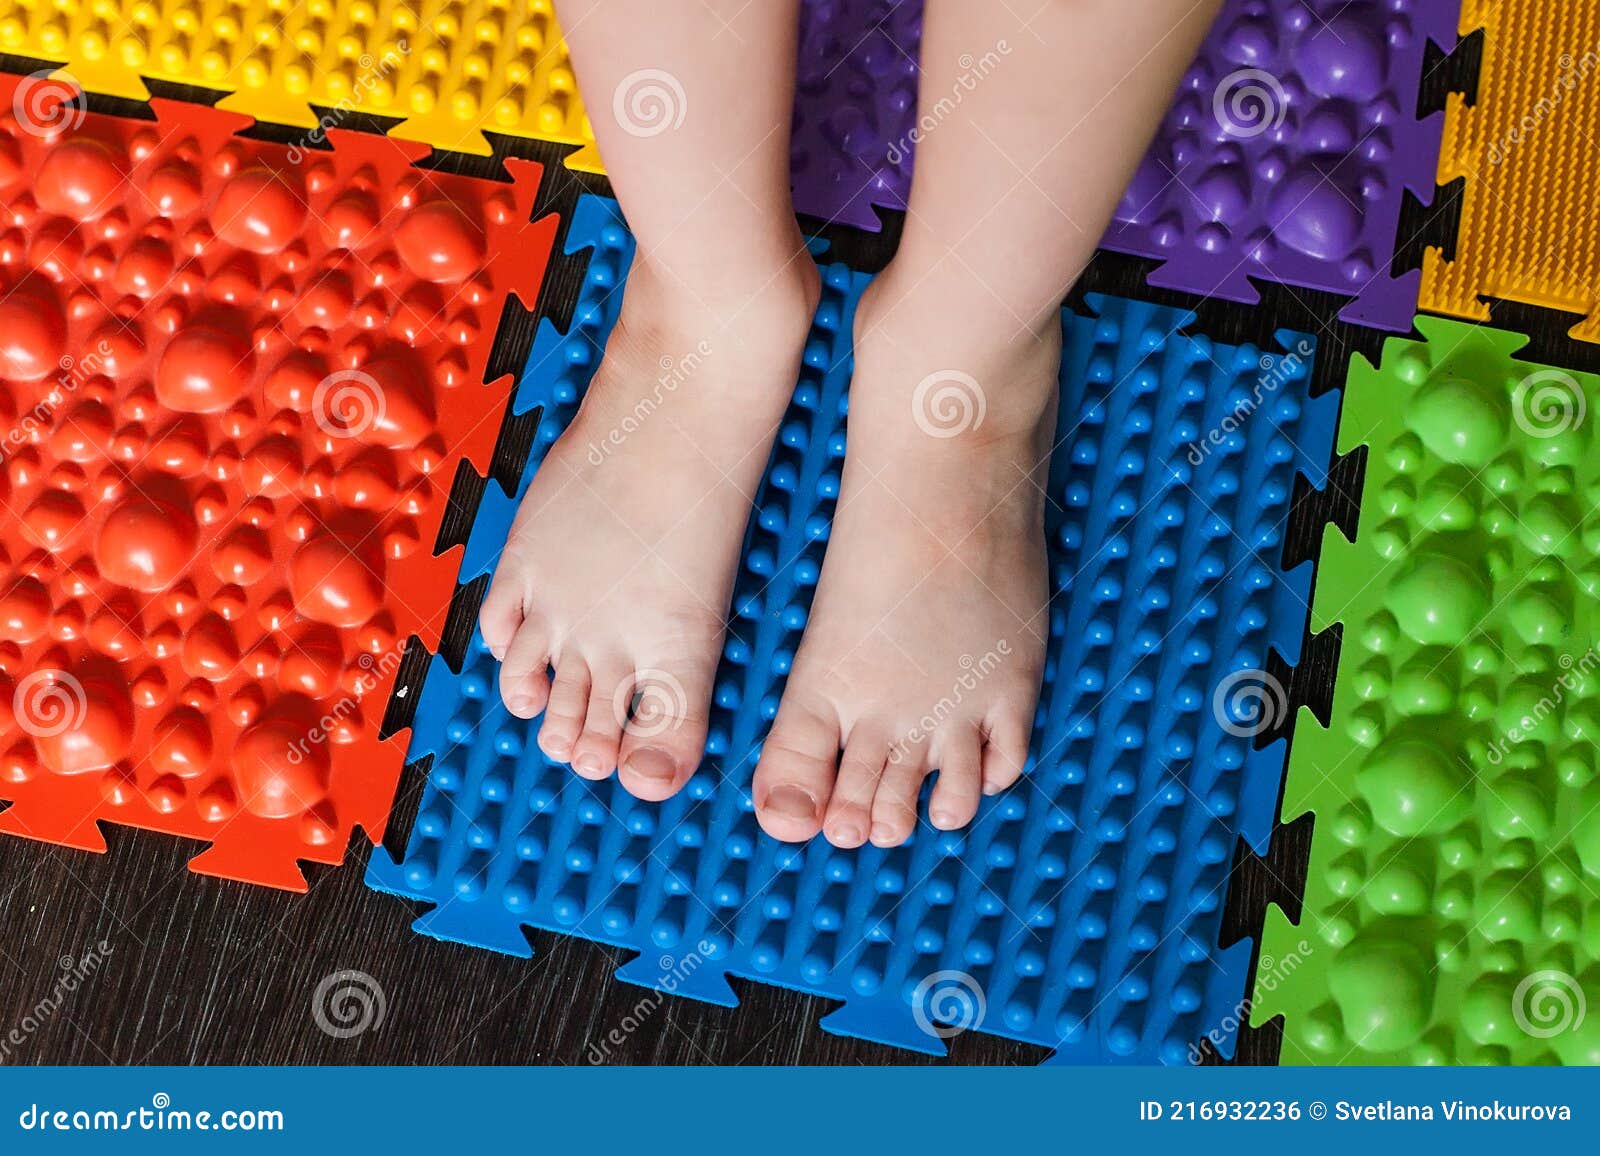 Foot Massage Mat for Babies. Prevention of Flat Feet and Hallux Valgus  Stock Photo - Image of feet, care: 216932236